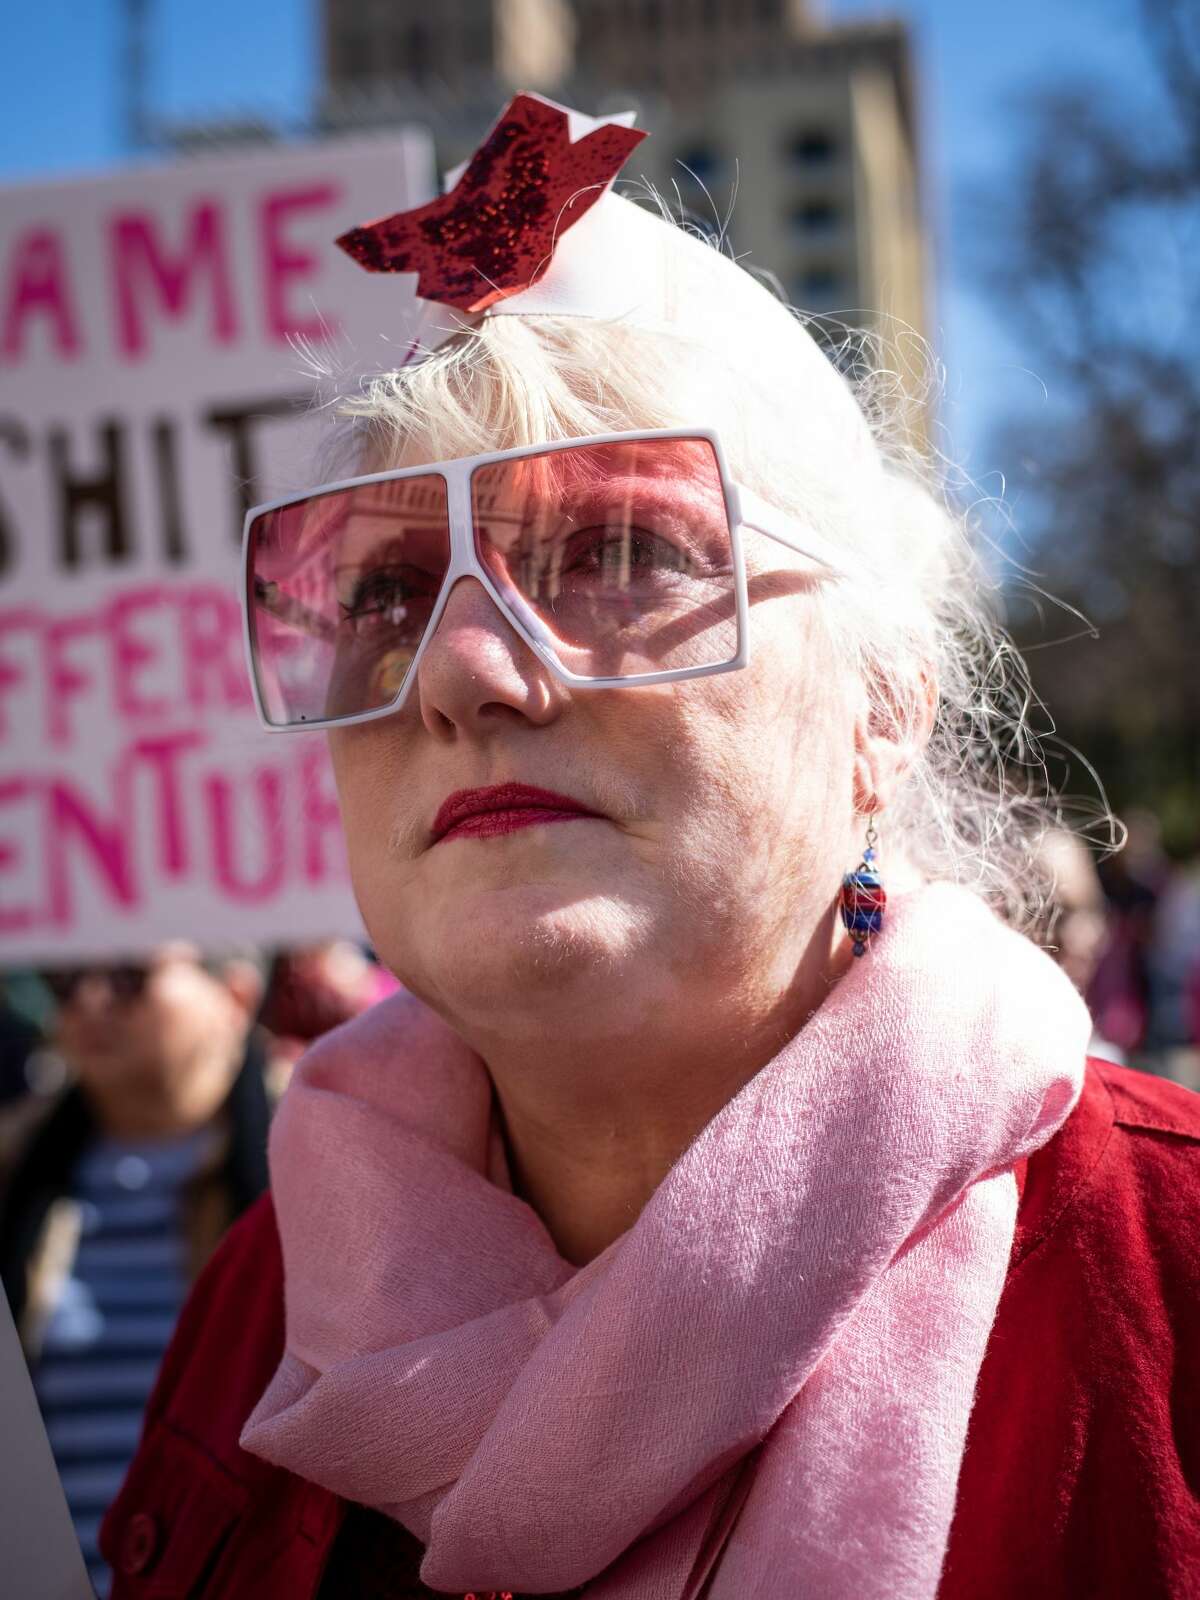 Patti Hinkley, a 20 year veteran of the U.S. Air Force, listens to speeches given during the Women's March rally on Saturday, January 19, 2019 held in front of the San Fernando Cathedral in downtown San Antonio, Texas. Hinkley said that her time in the military was plagued with harassment and discrimination based on her gender. "It was a constant fight," Patti said, "having your opinions shouted down, just having the work that you did recognized and was valid." "I try to imagine that women who go into the military now have it easier, but I'm sure it's just more subtle. I know they're still fighting just to do their job."